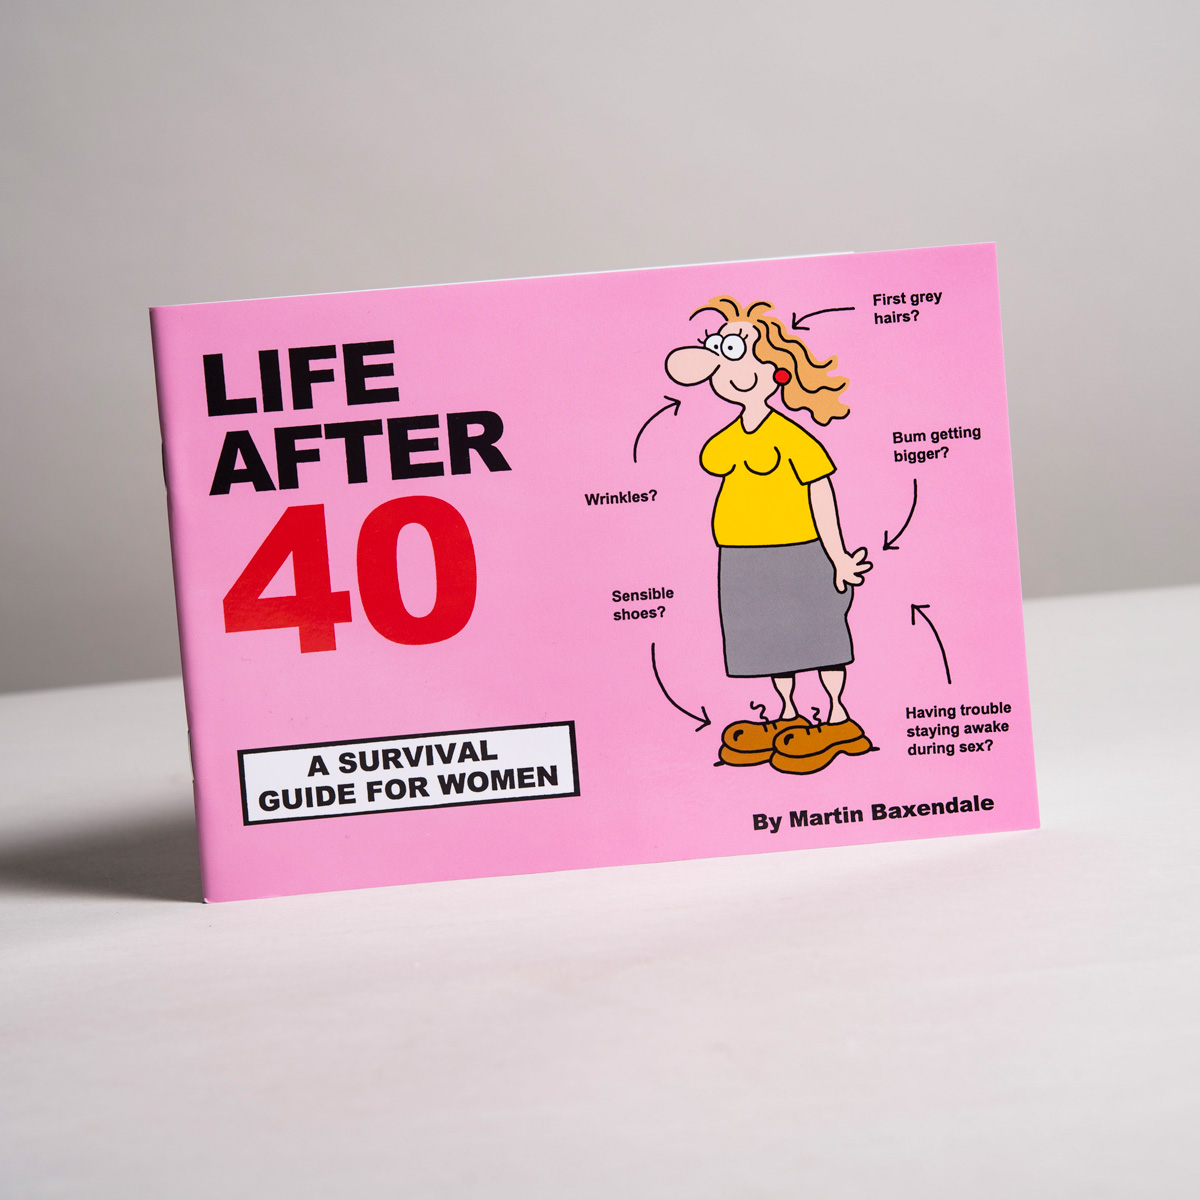 Life After 40 - Survival Guide for Women